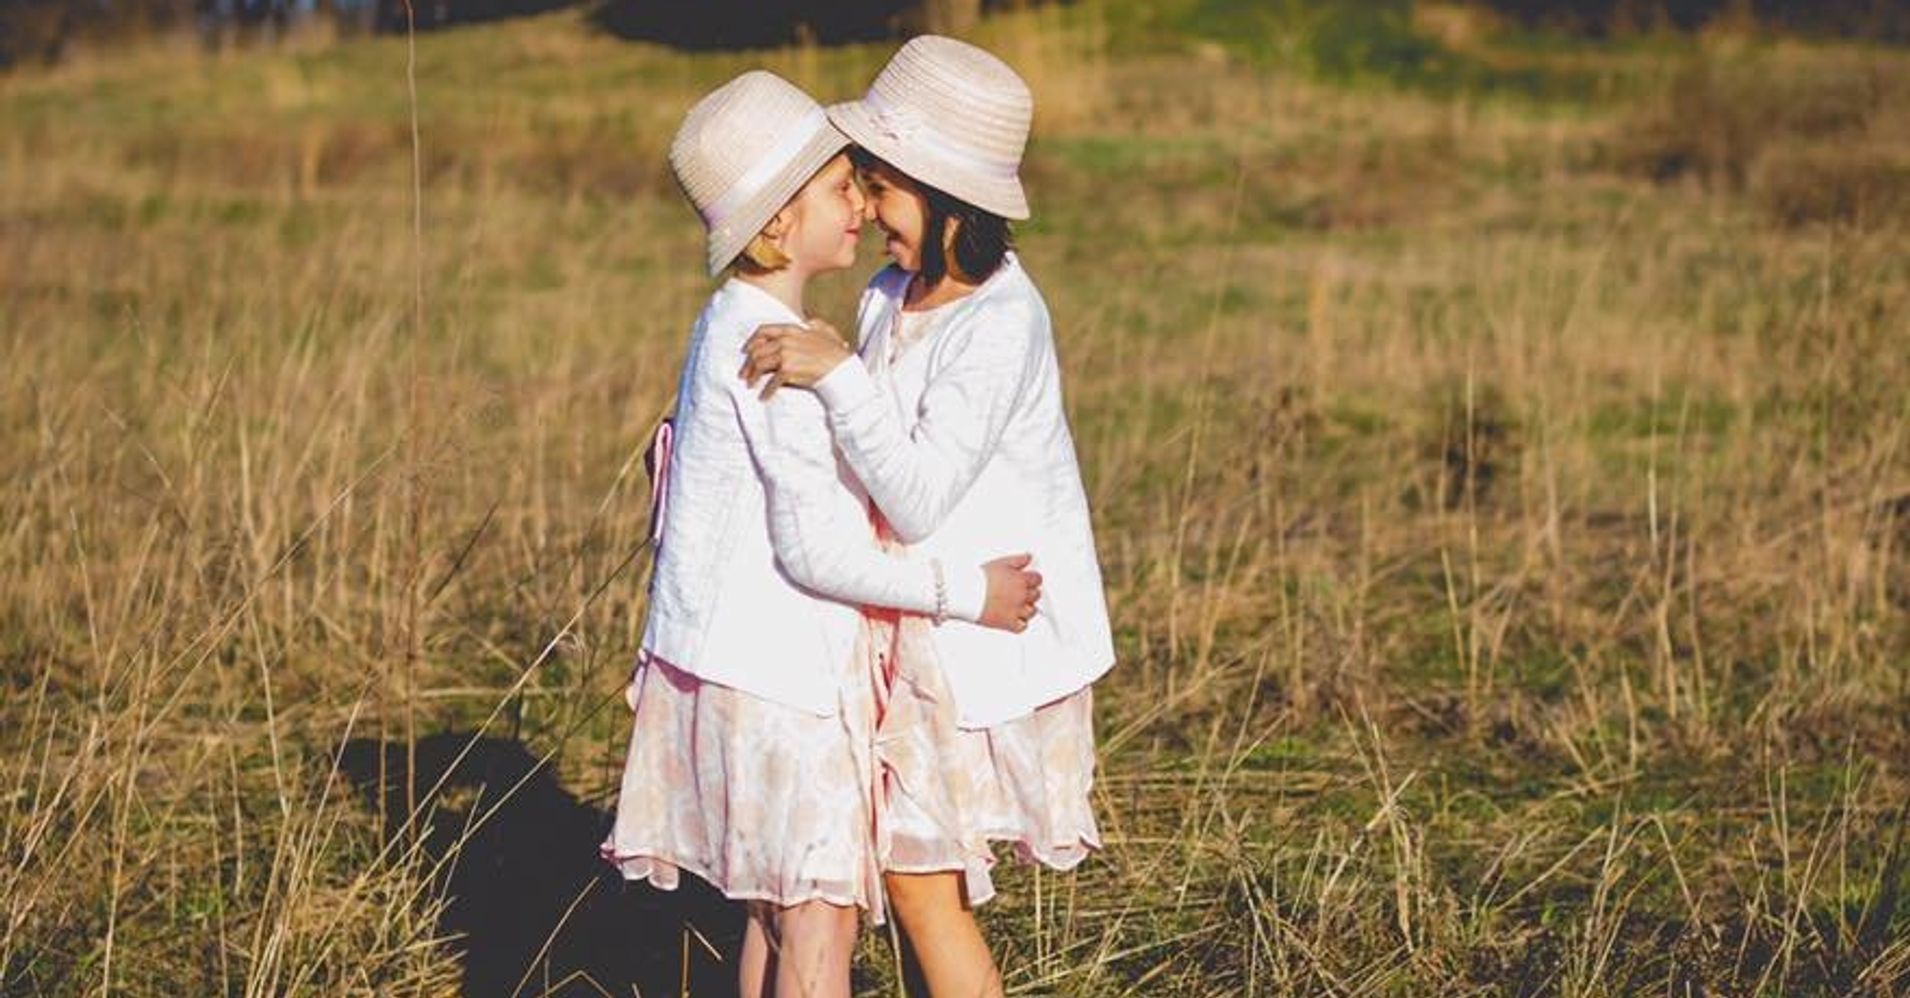 43 Photos Of Adopted Siblings That Show Family Is About Love, Not DNA